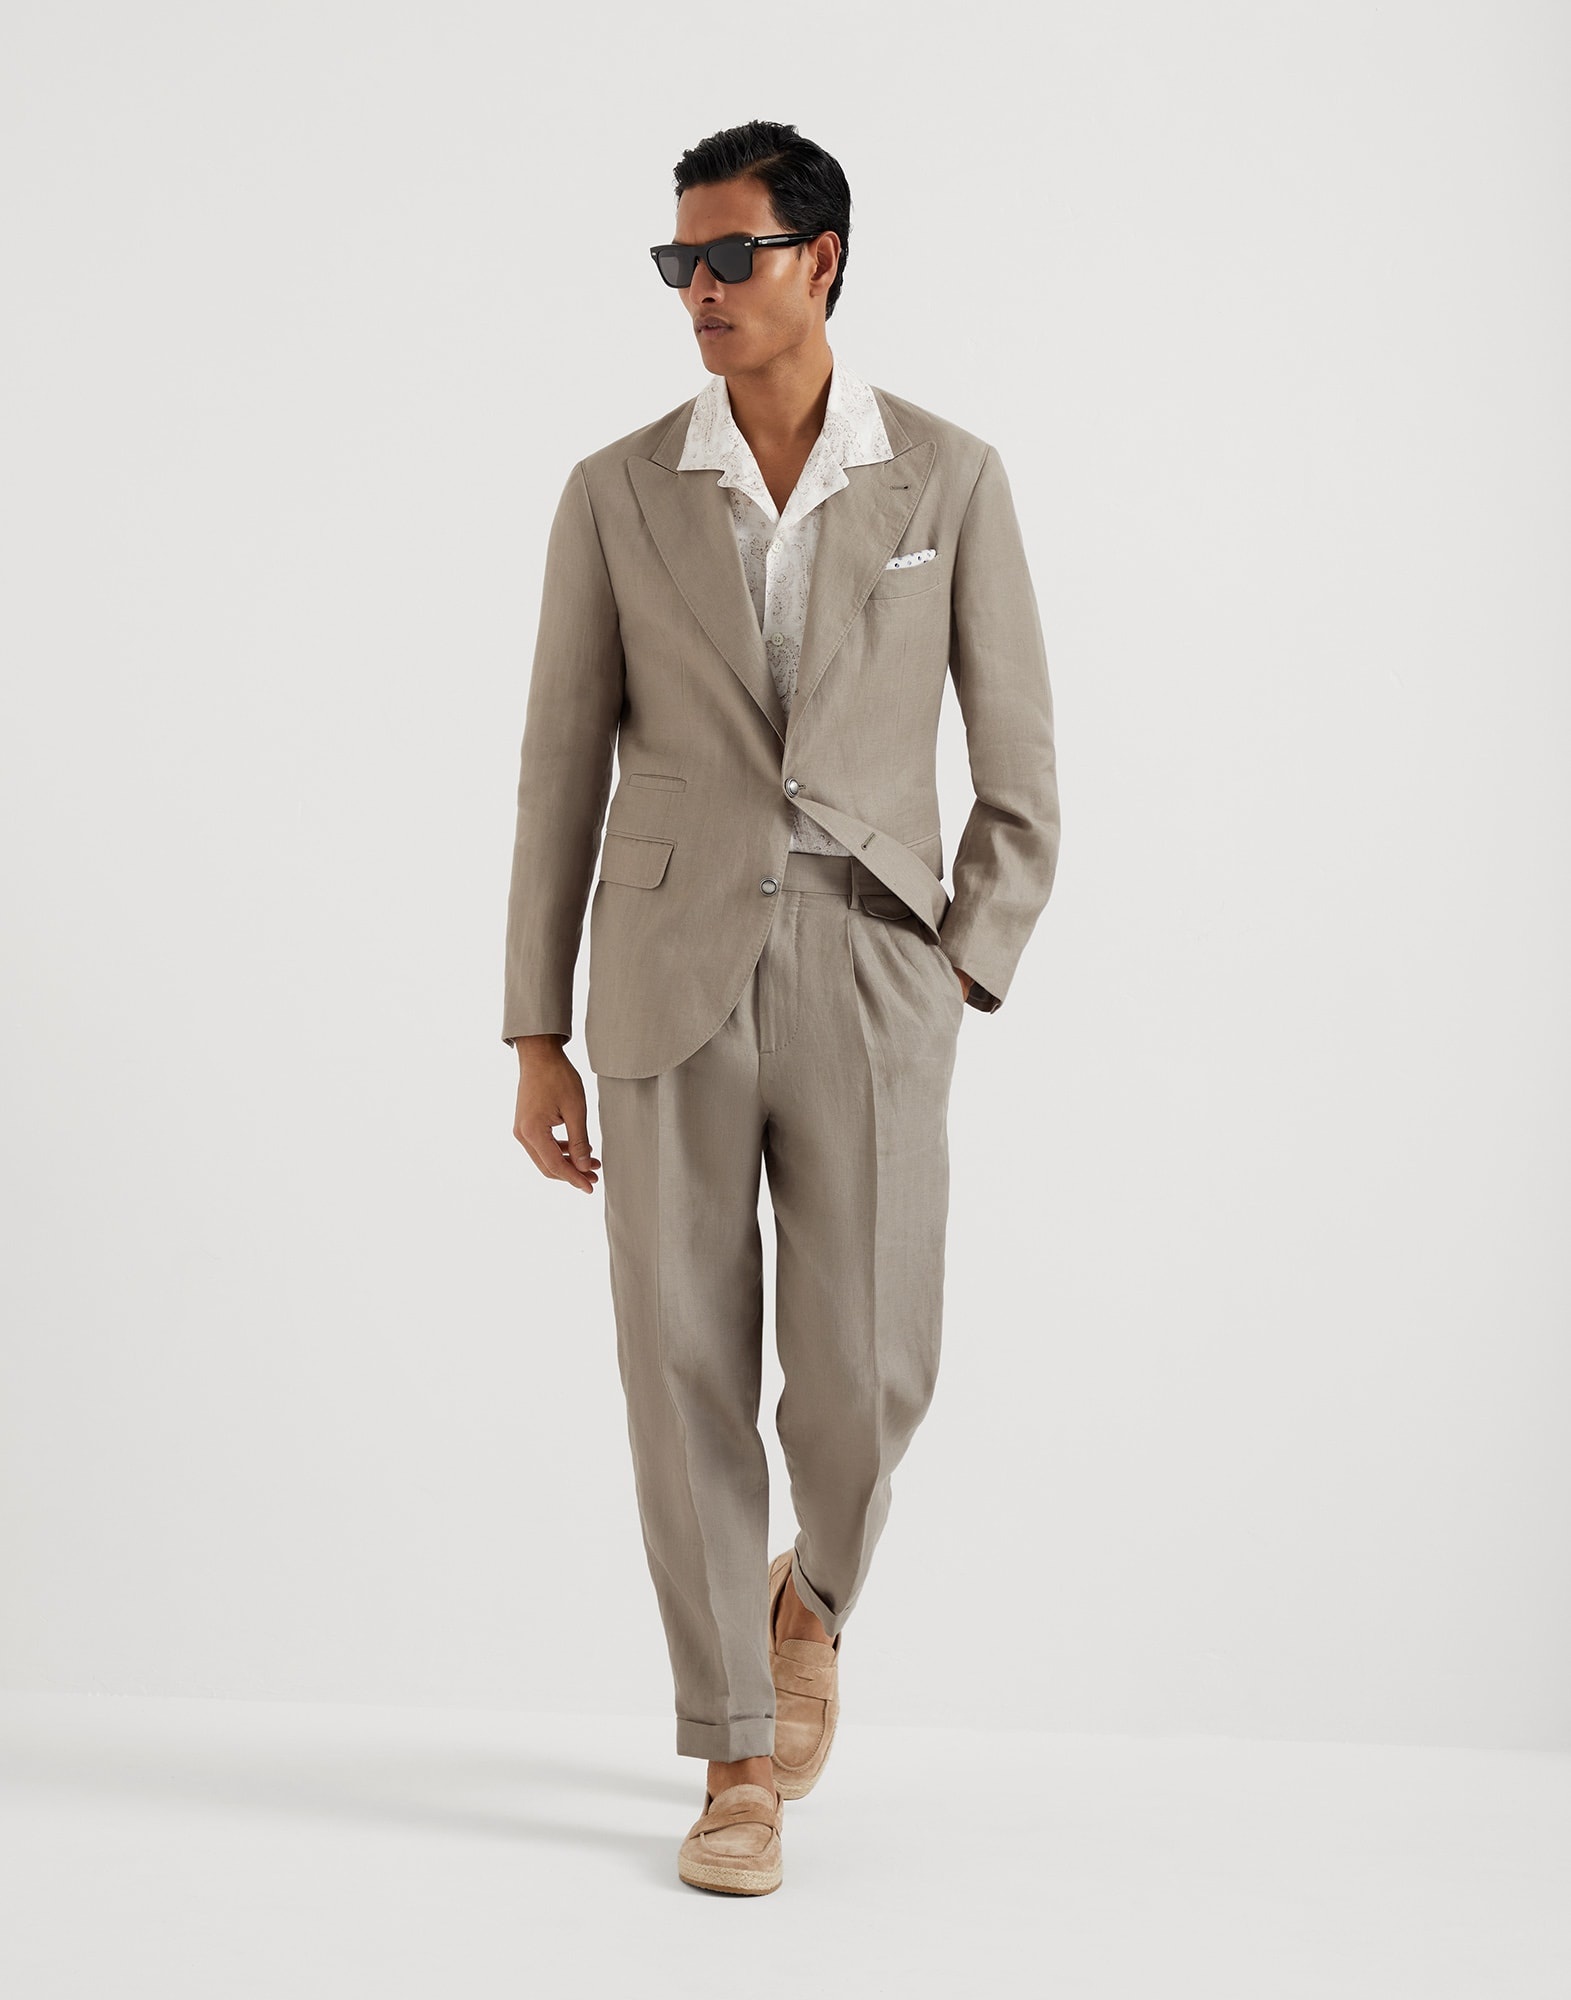 Linen micro chevron Leisure suit: peak lapel jacket with metal buttons and double-pleated trousers - 4